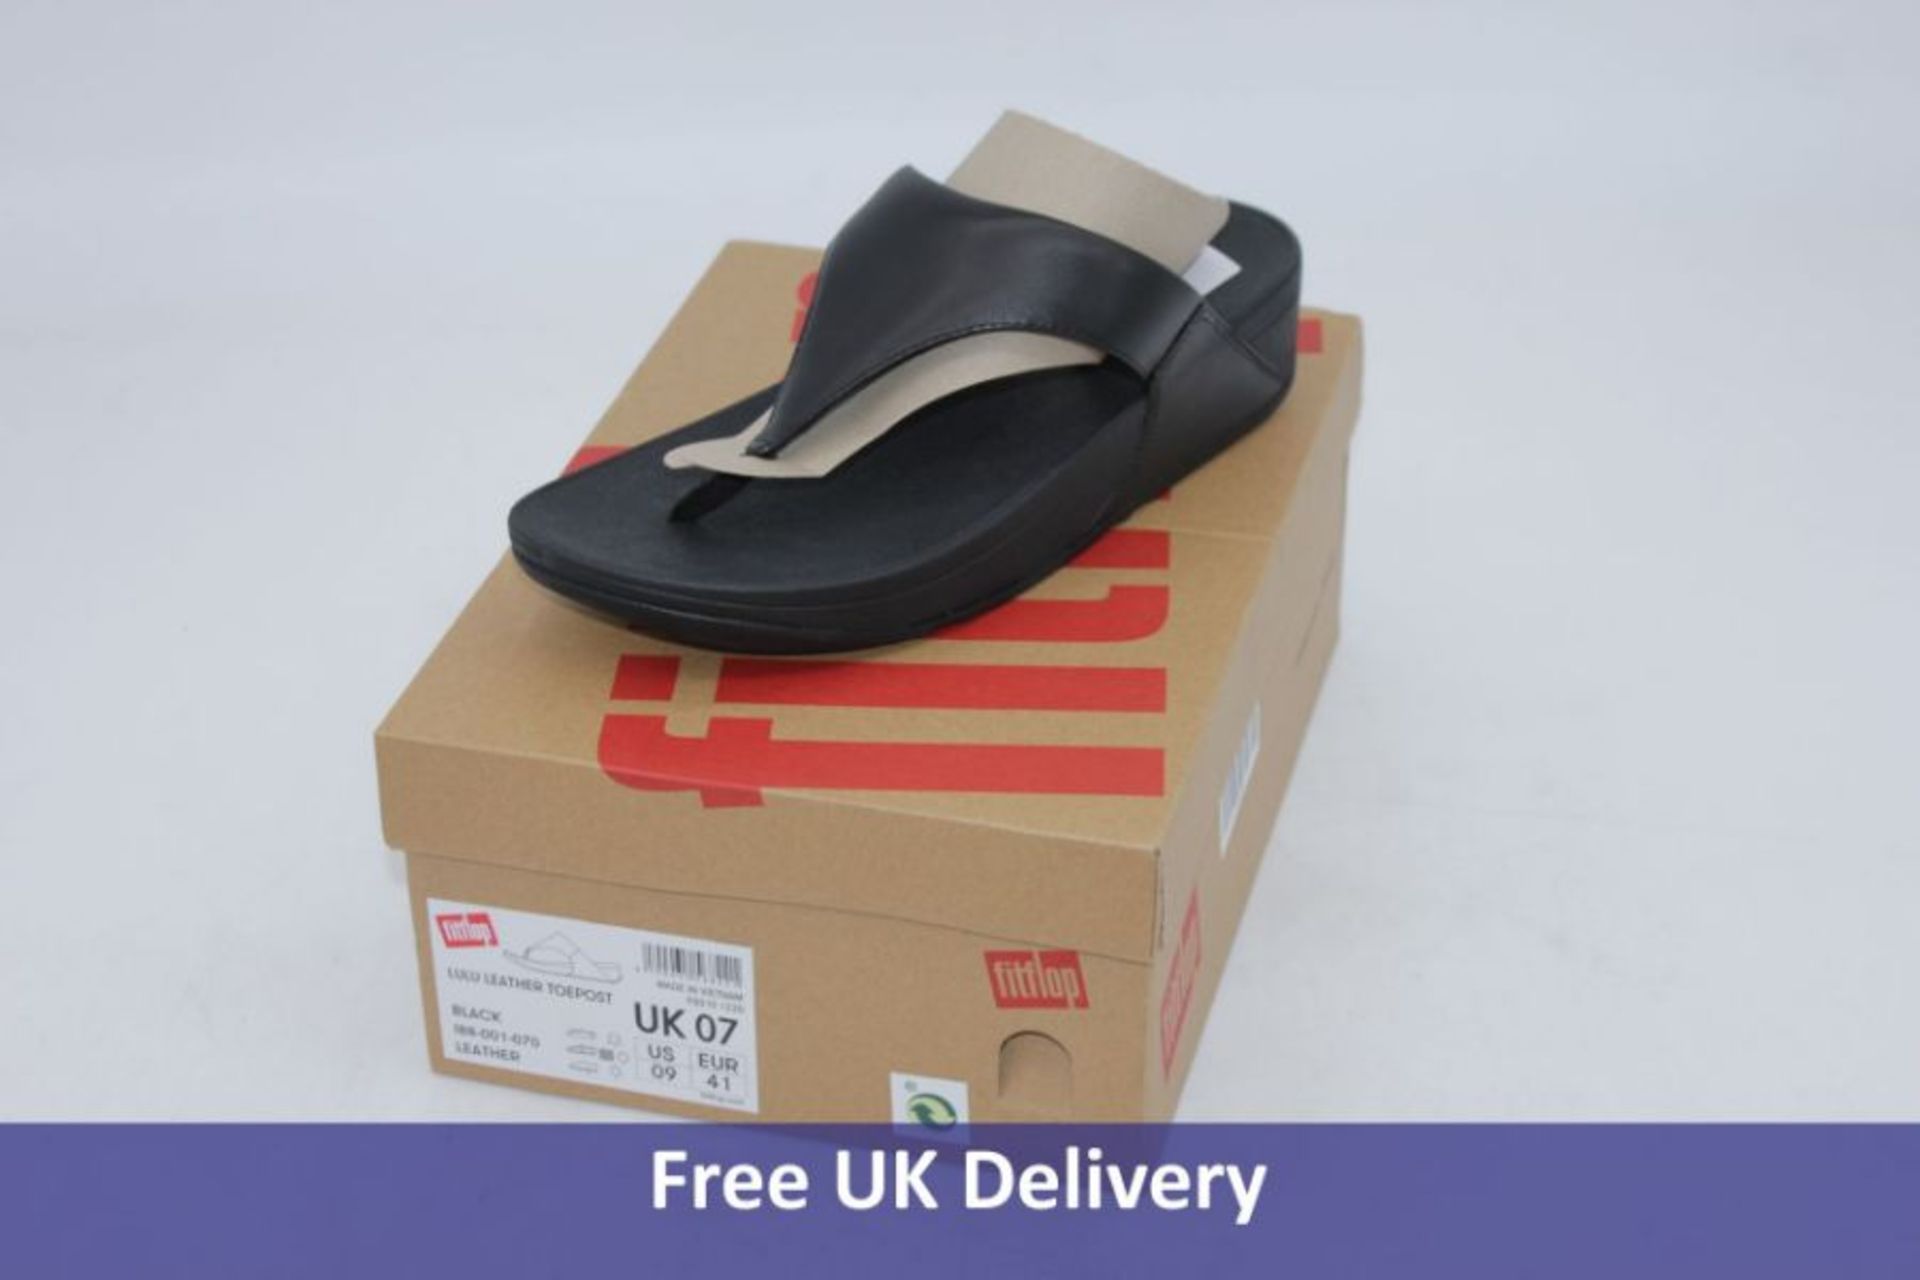 Three pairs of Fitflop Sandals to include 1x Lulu Toepost Leather Sandals, Black, UK 7, 1x Sola Feat